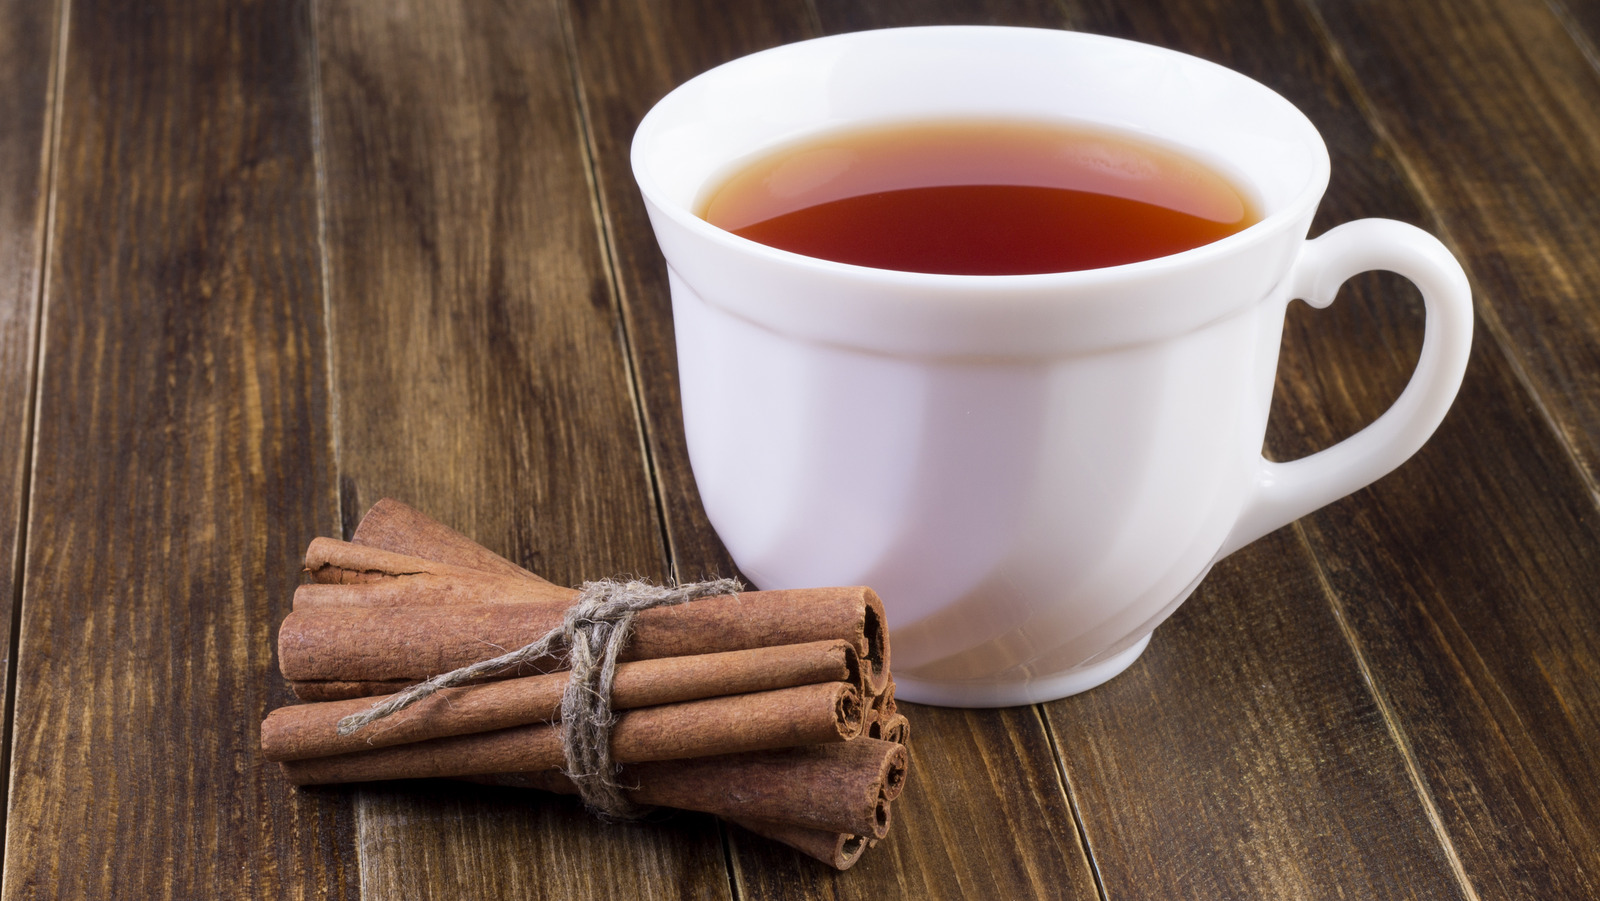 Cinnamon Green Tea - American Institute for Cancer Research